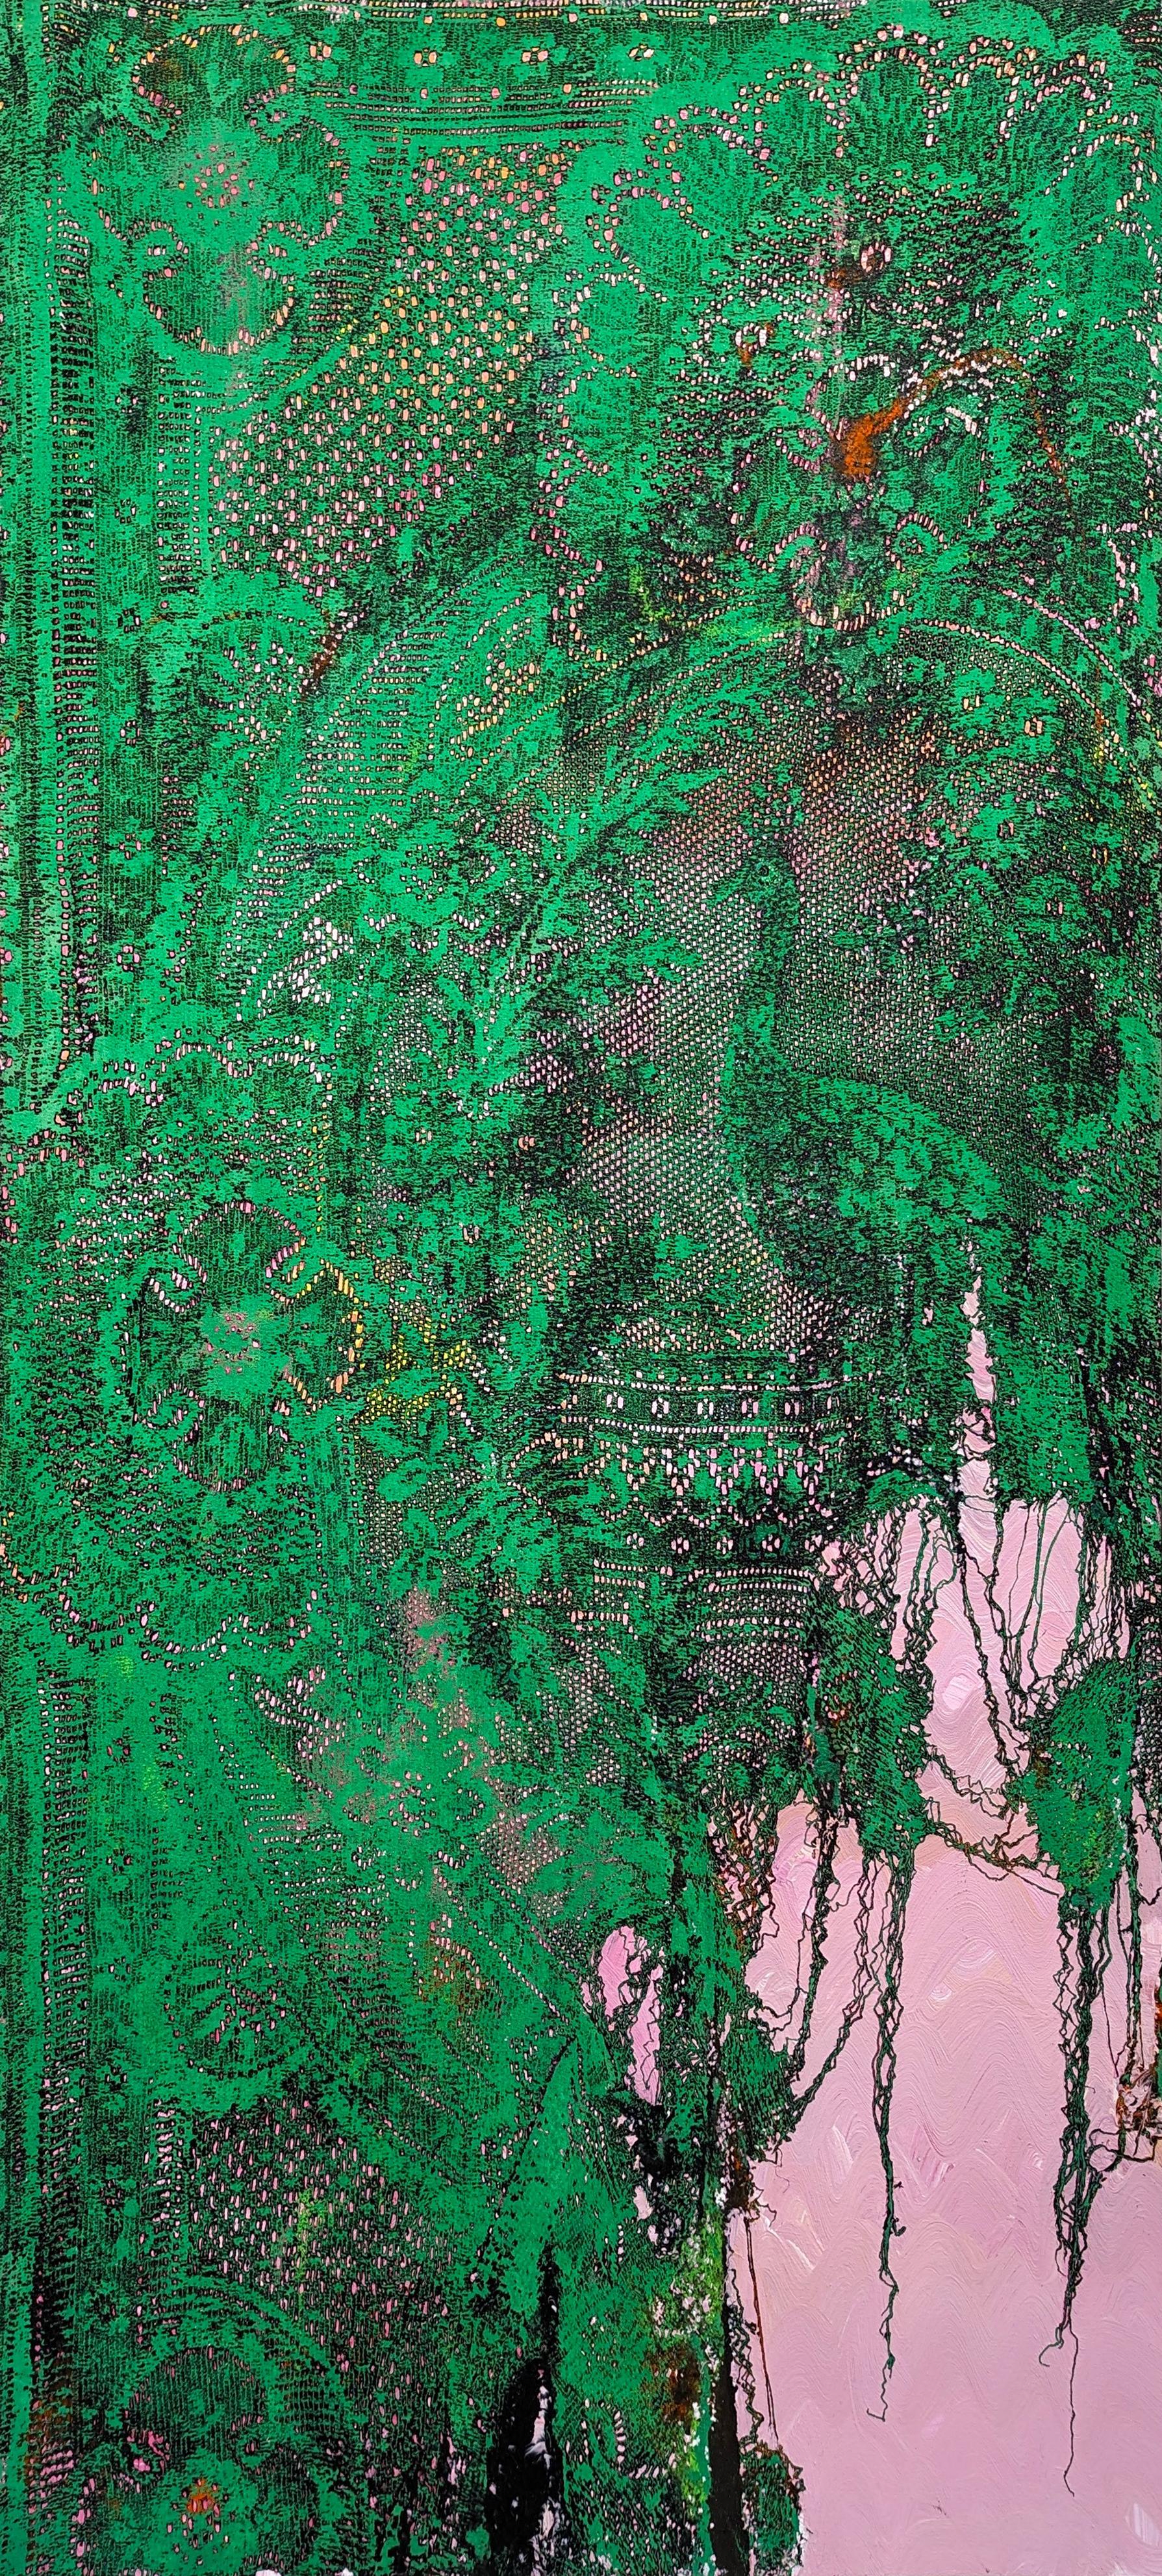 “Green Peacock” Contemporary Green & Pink Abstract Lace Painting